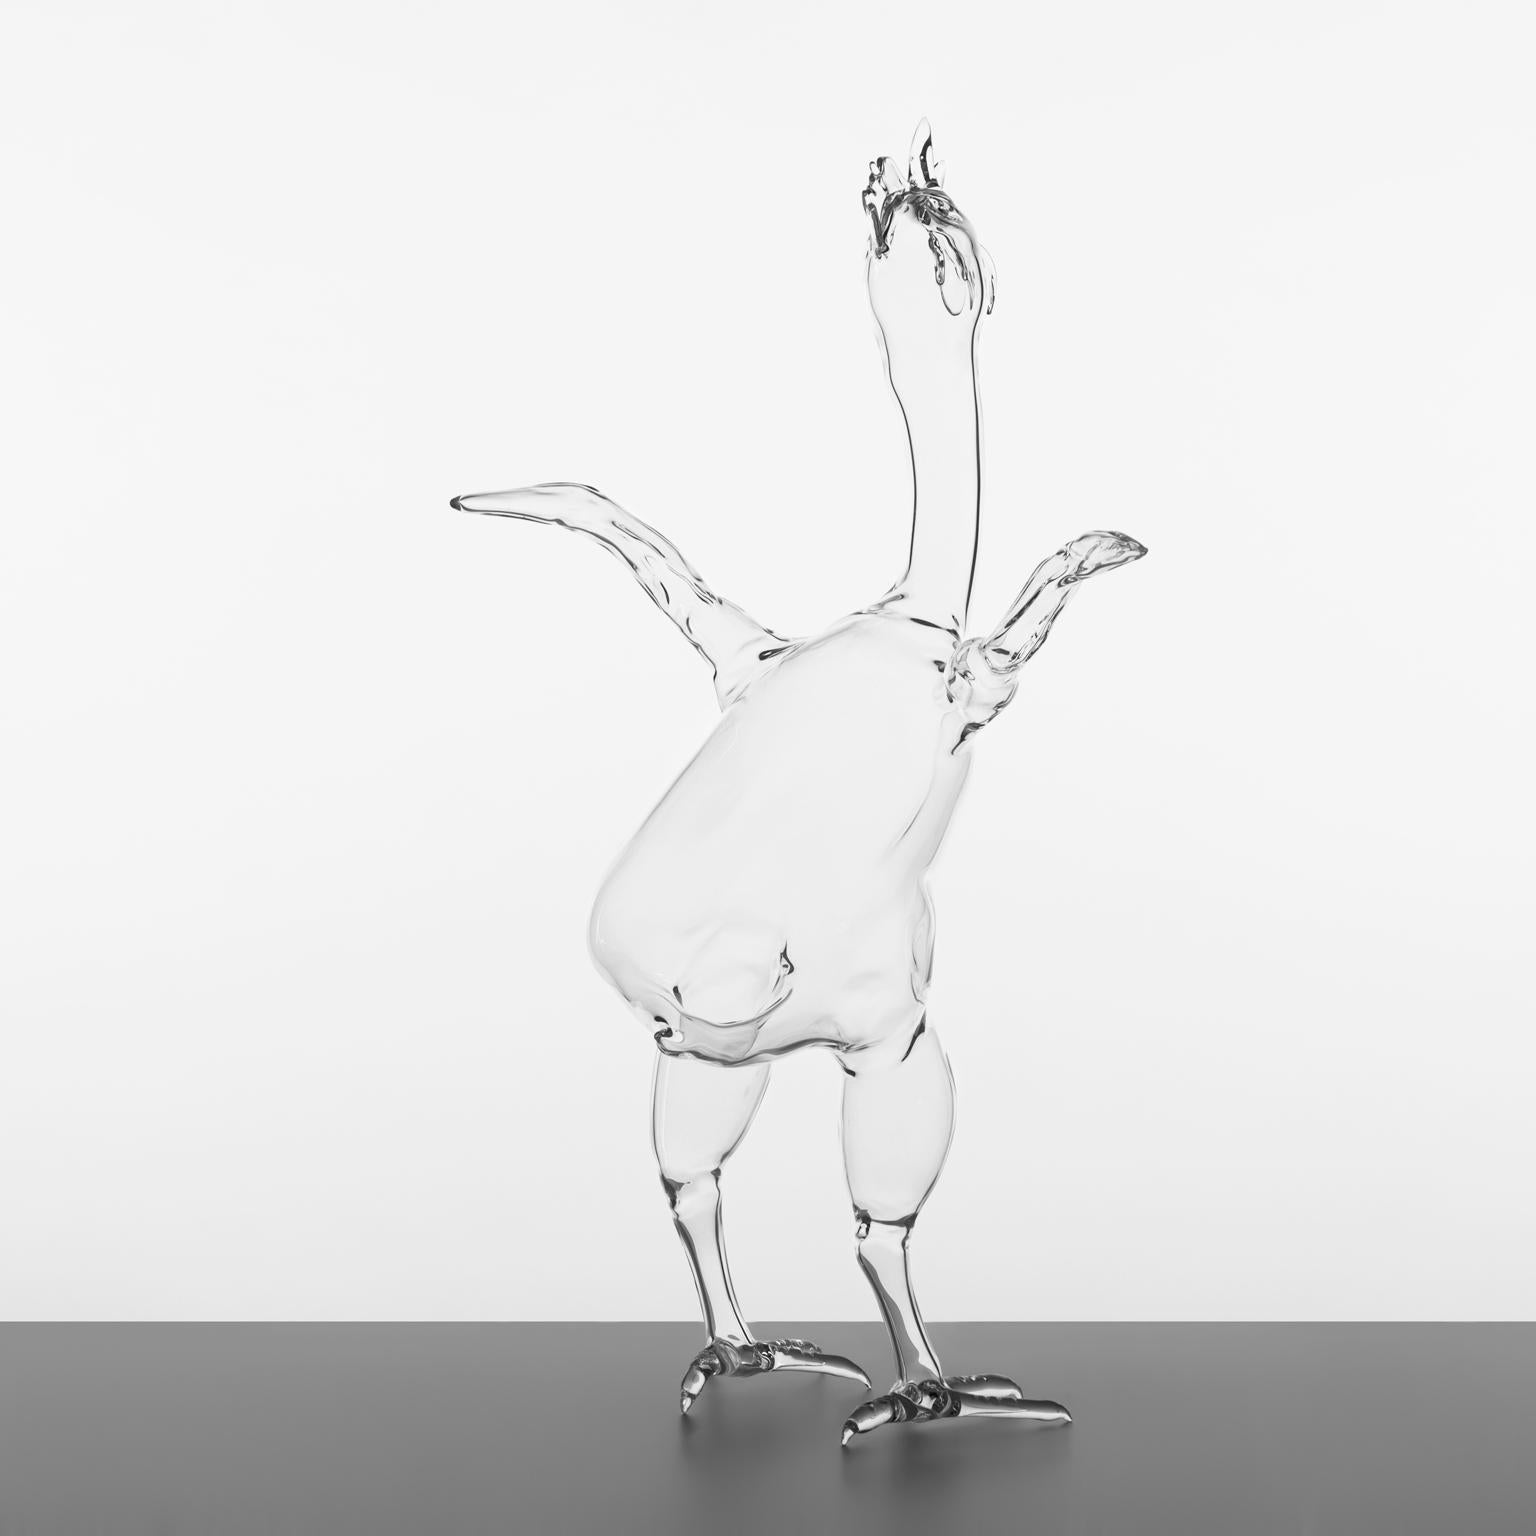 Hand blown glass sculpture representing a rooster.

Artist: Simone Crestani
Material: borosilicate glass
Technique: flameworking
Unique piece
Year: 2020
Measures: Height 23.2”, width 11